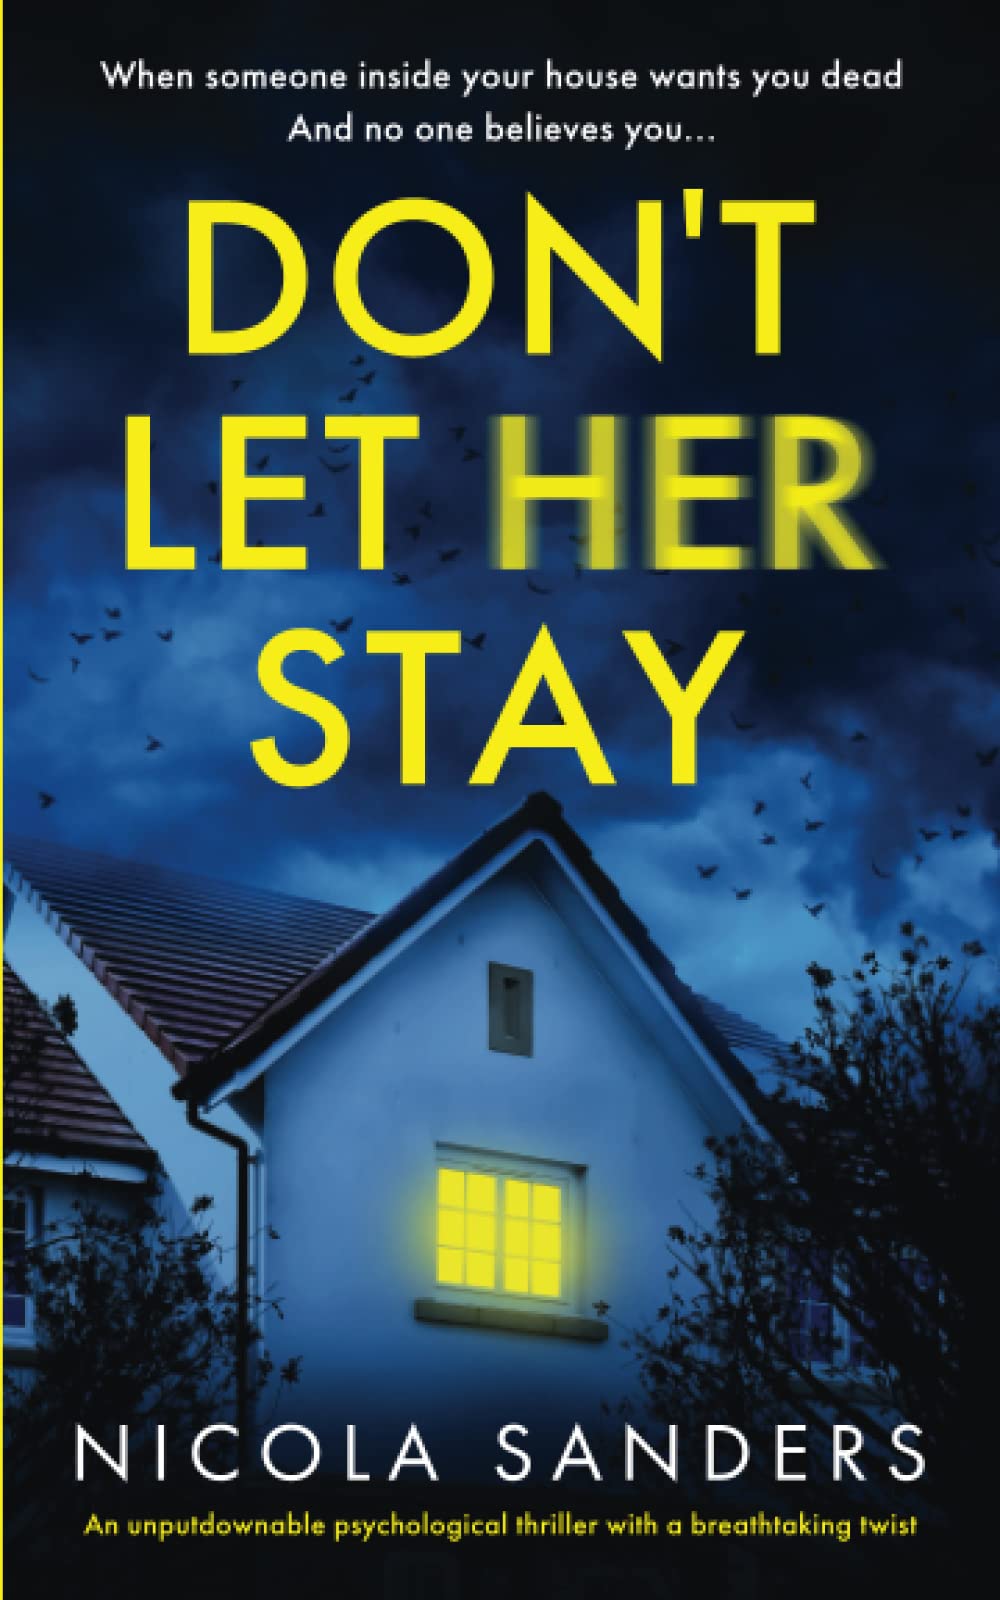 Don't Let Her Stay